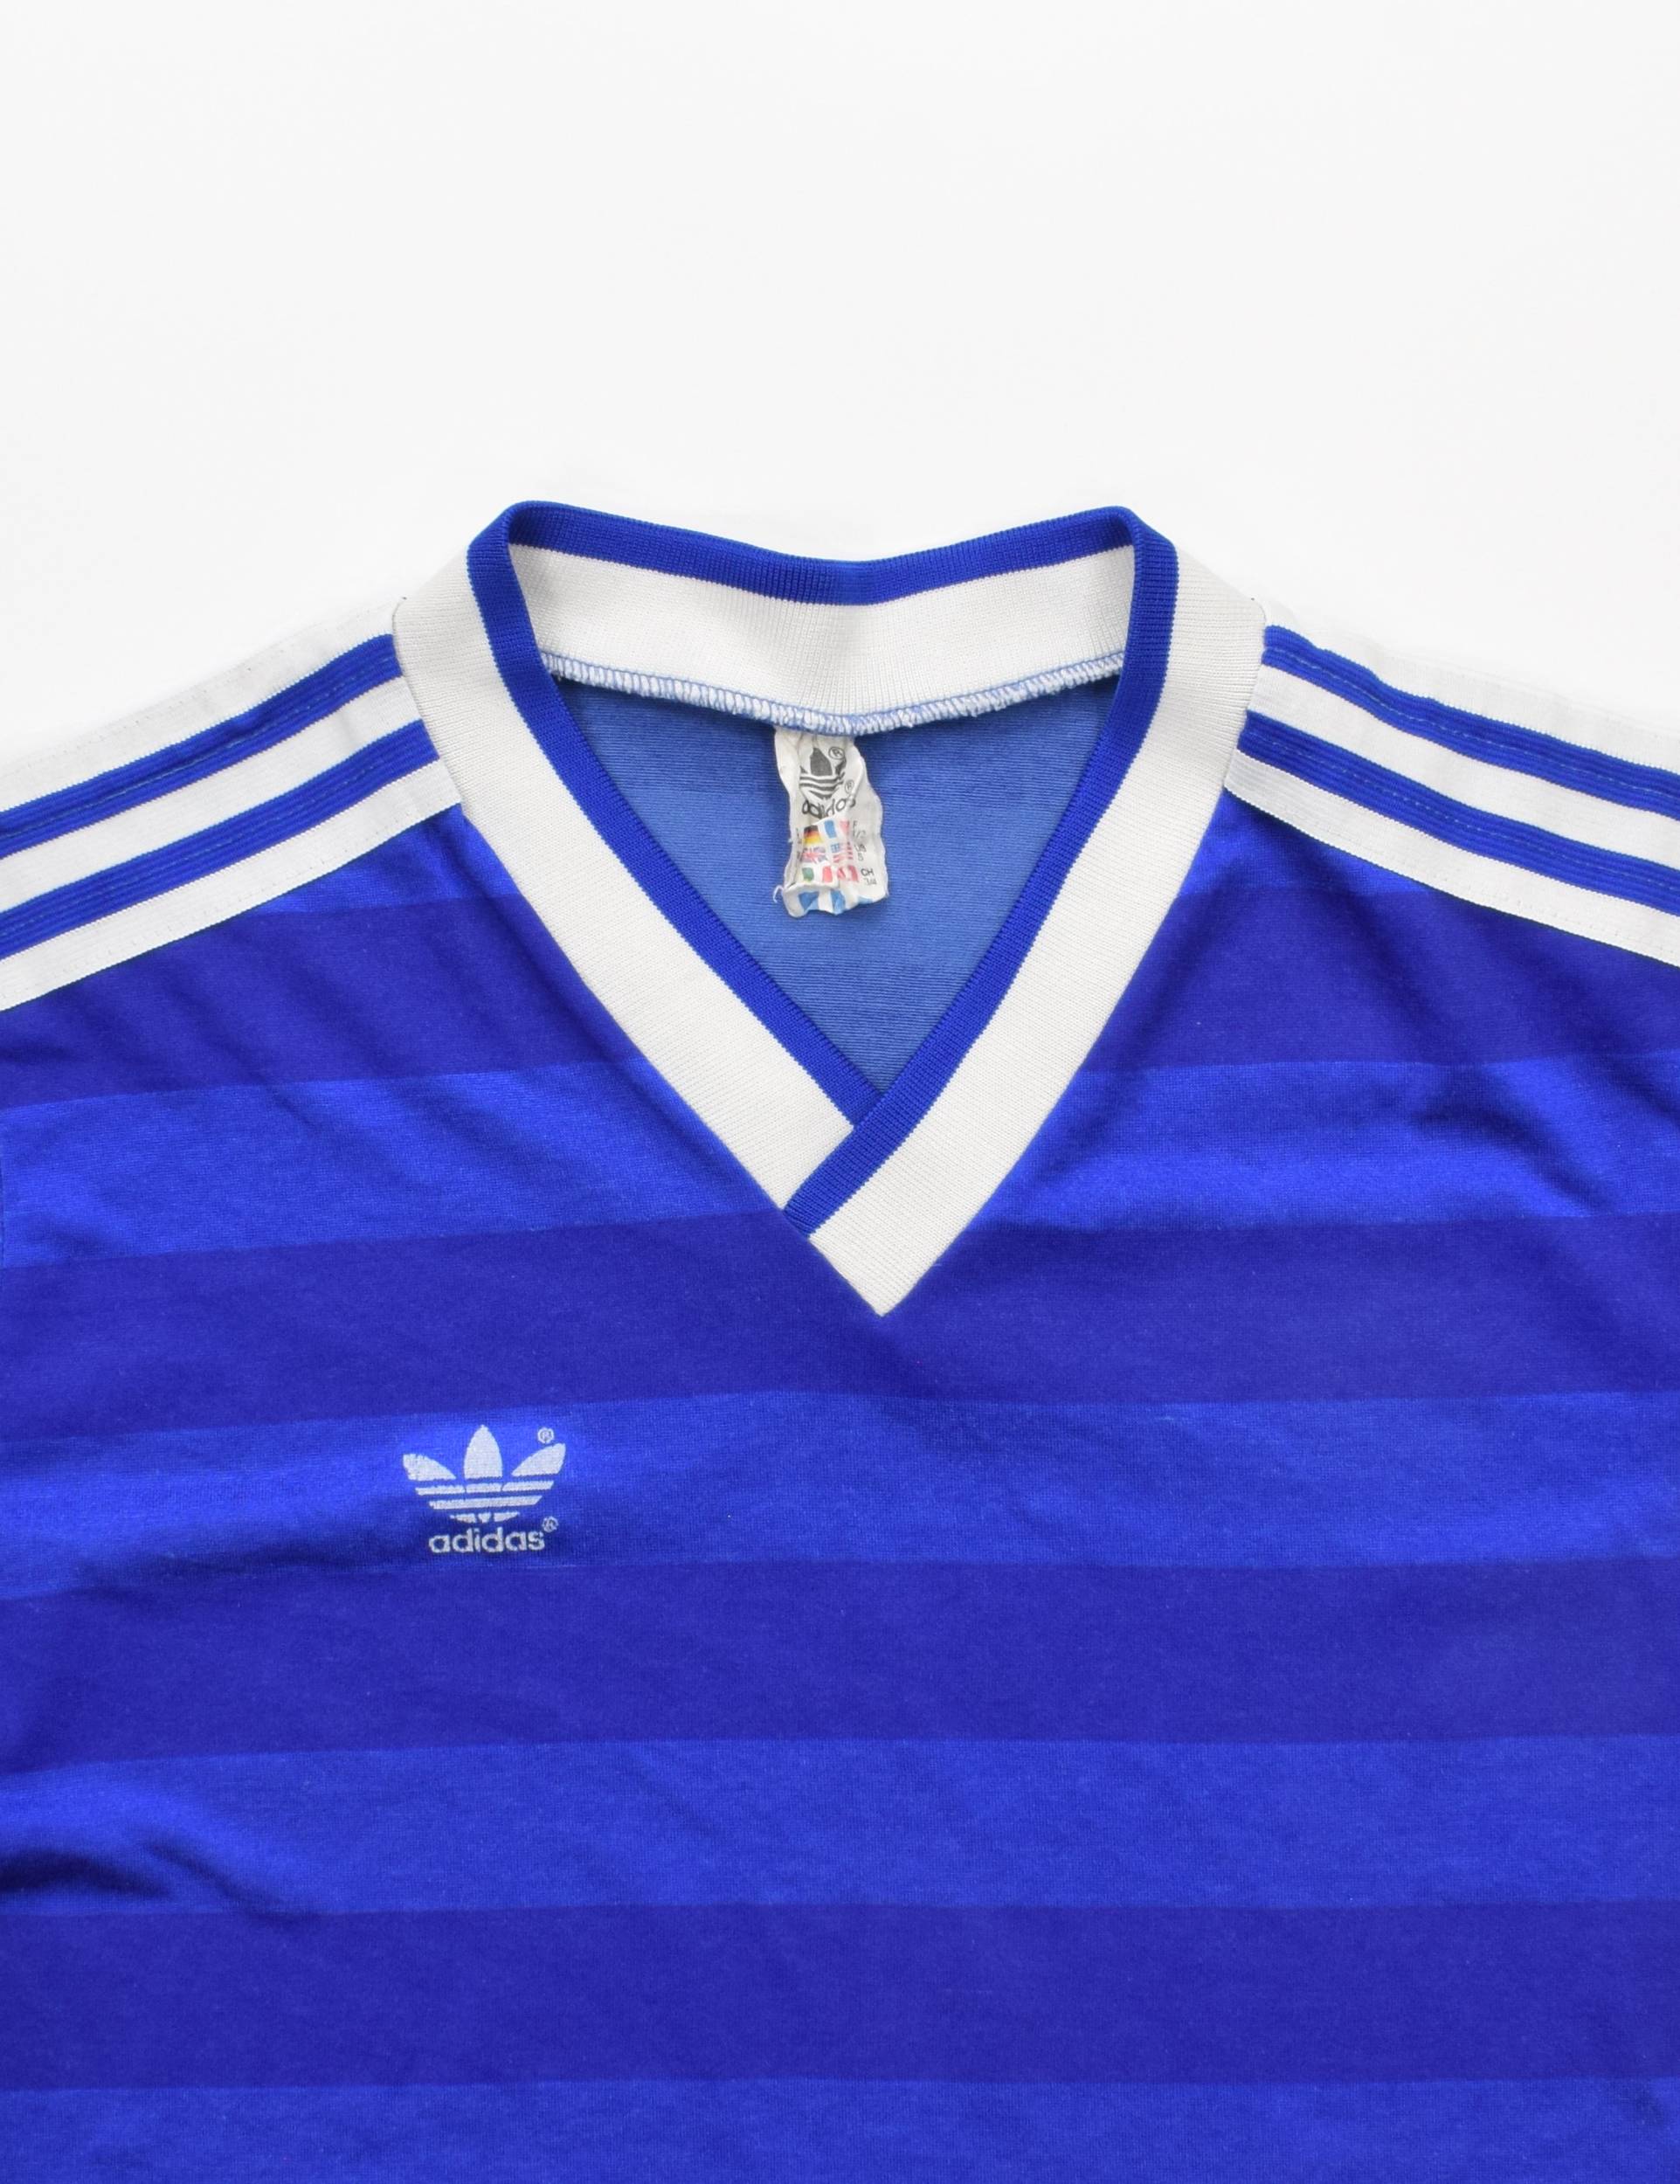 ADIDAS MADE IN WEST GERMANY SHIRT S Other Shirts \ Vintage | Classic ...